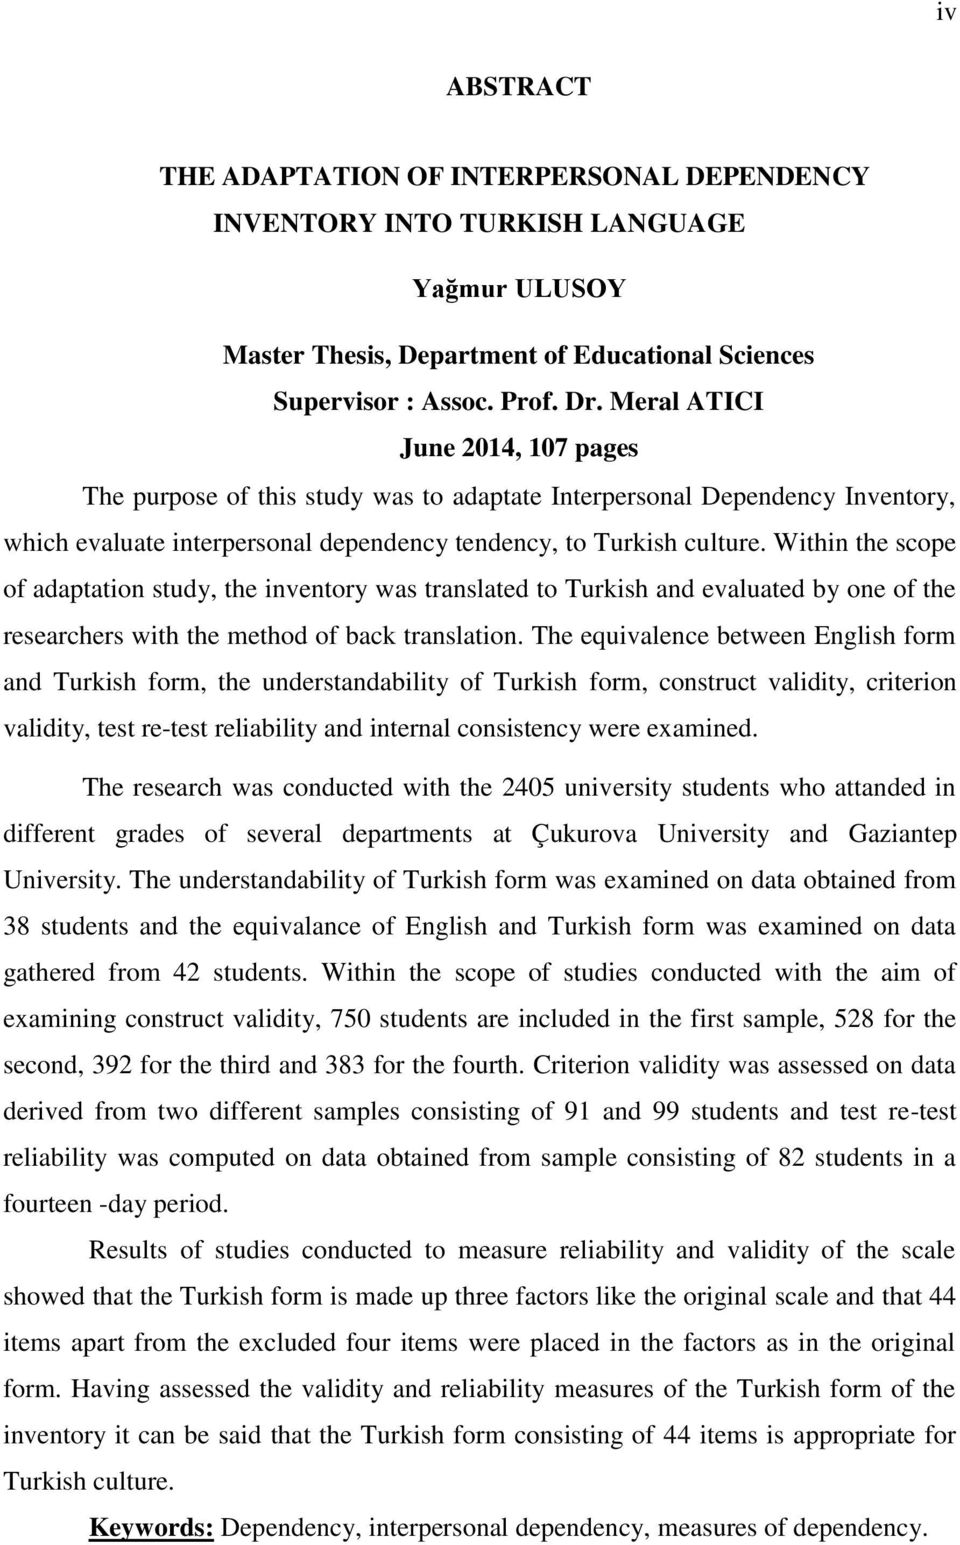 Within the scope of adaptation study, the inventory was translated to Turkish and evaluated by one of the researchers with the method of back translation.